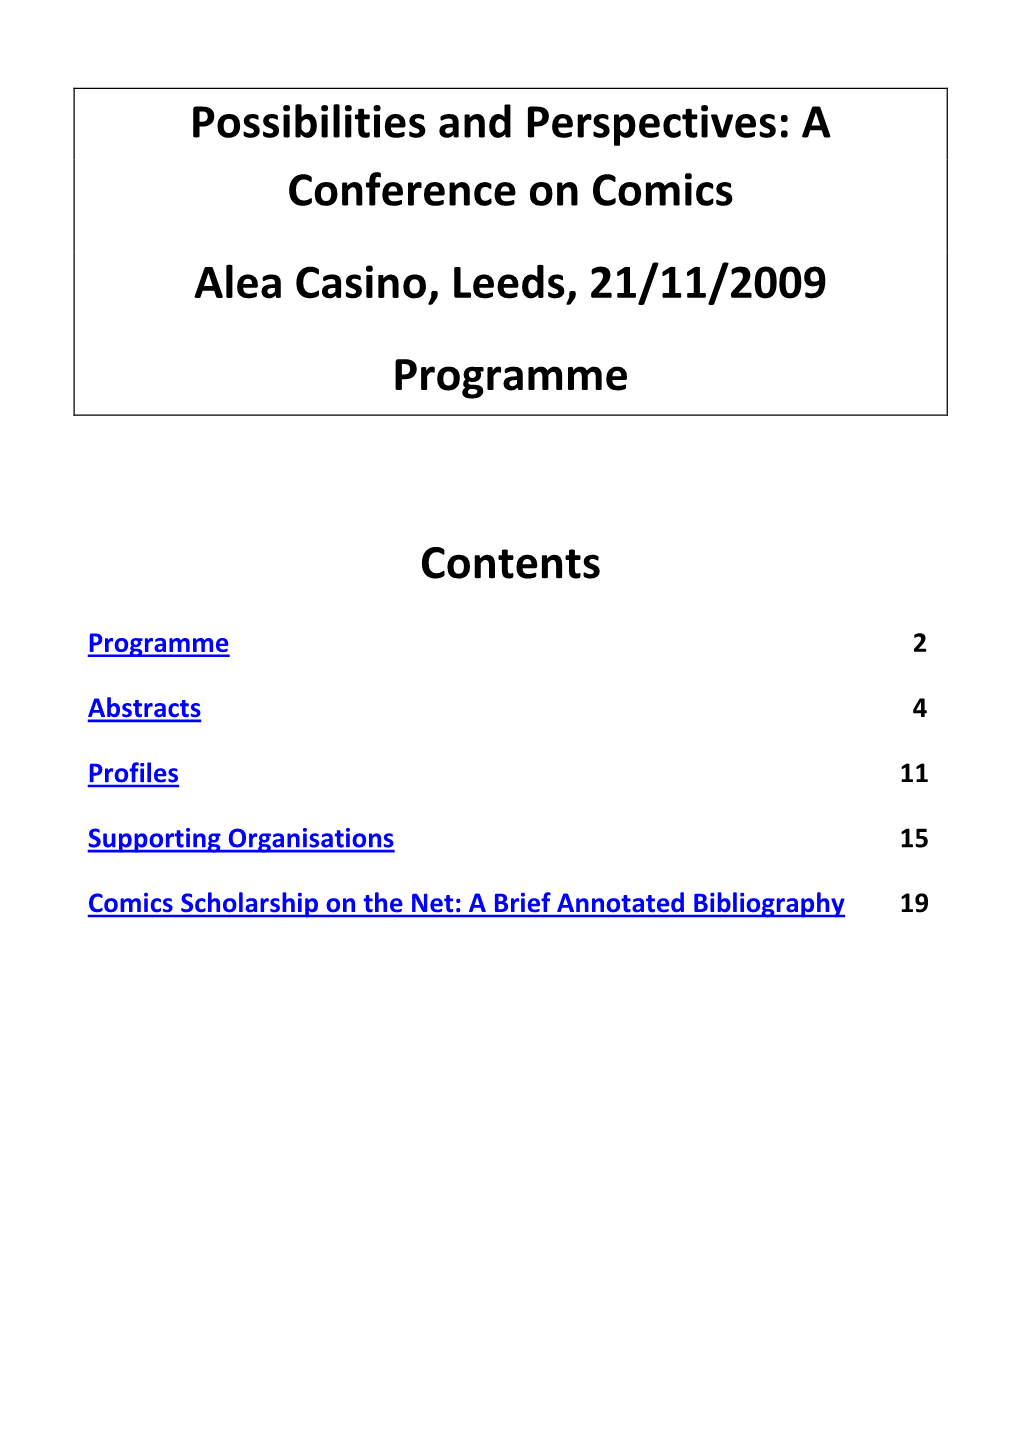 Possibilities and Perspectives: a Conference on Comics Alea Casino, Leeds, 21/11/2009 Programme